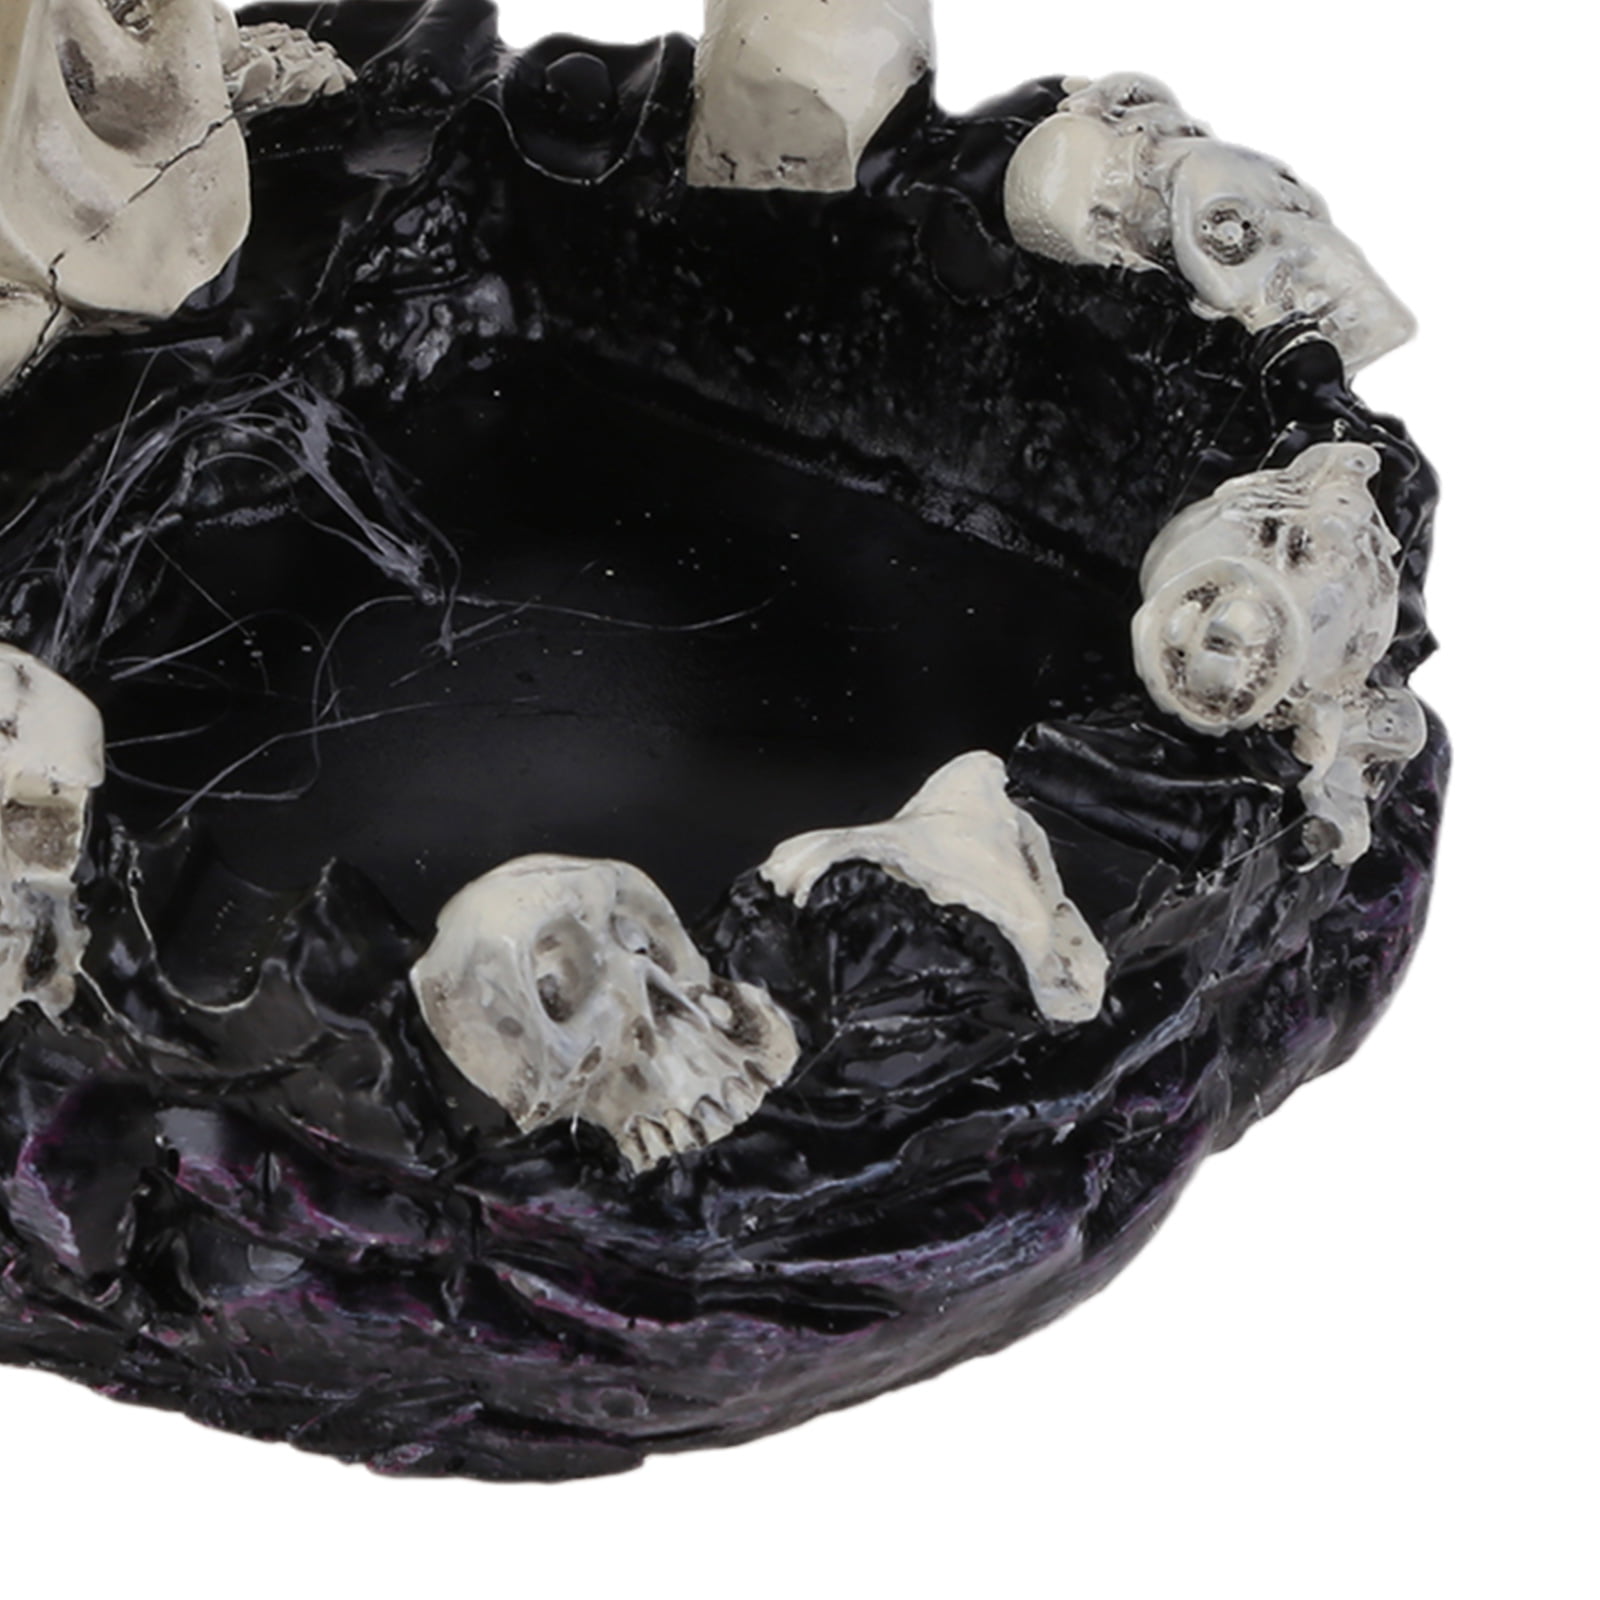 DWK Spooky Halloween Ashtray | Mythical Fantasy Home Decorative Sculptures Ashtray | Medieval and Gothic Gifts and Home Decor (Death Defying)